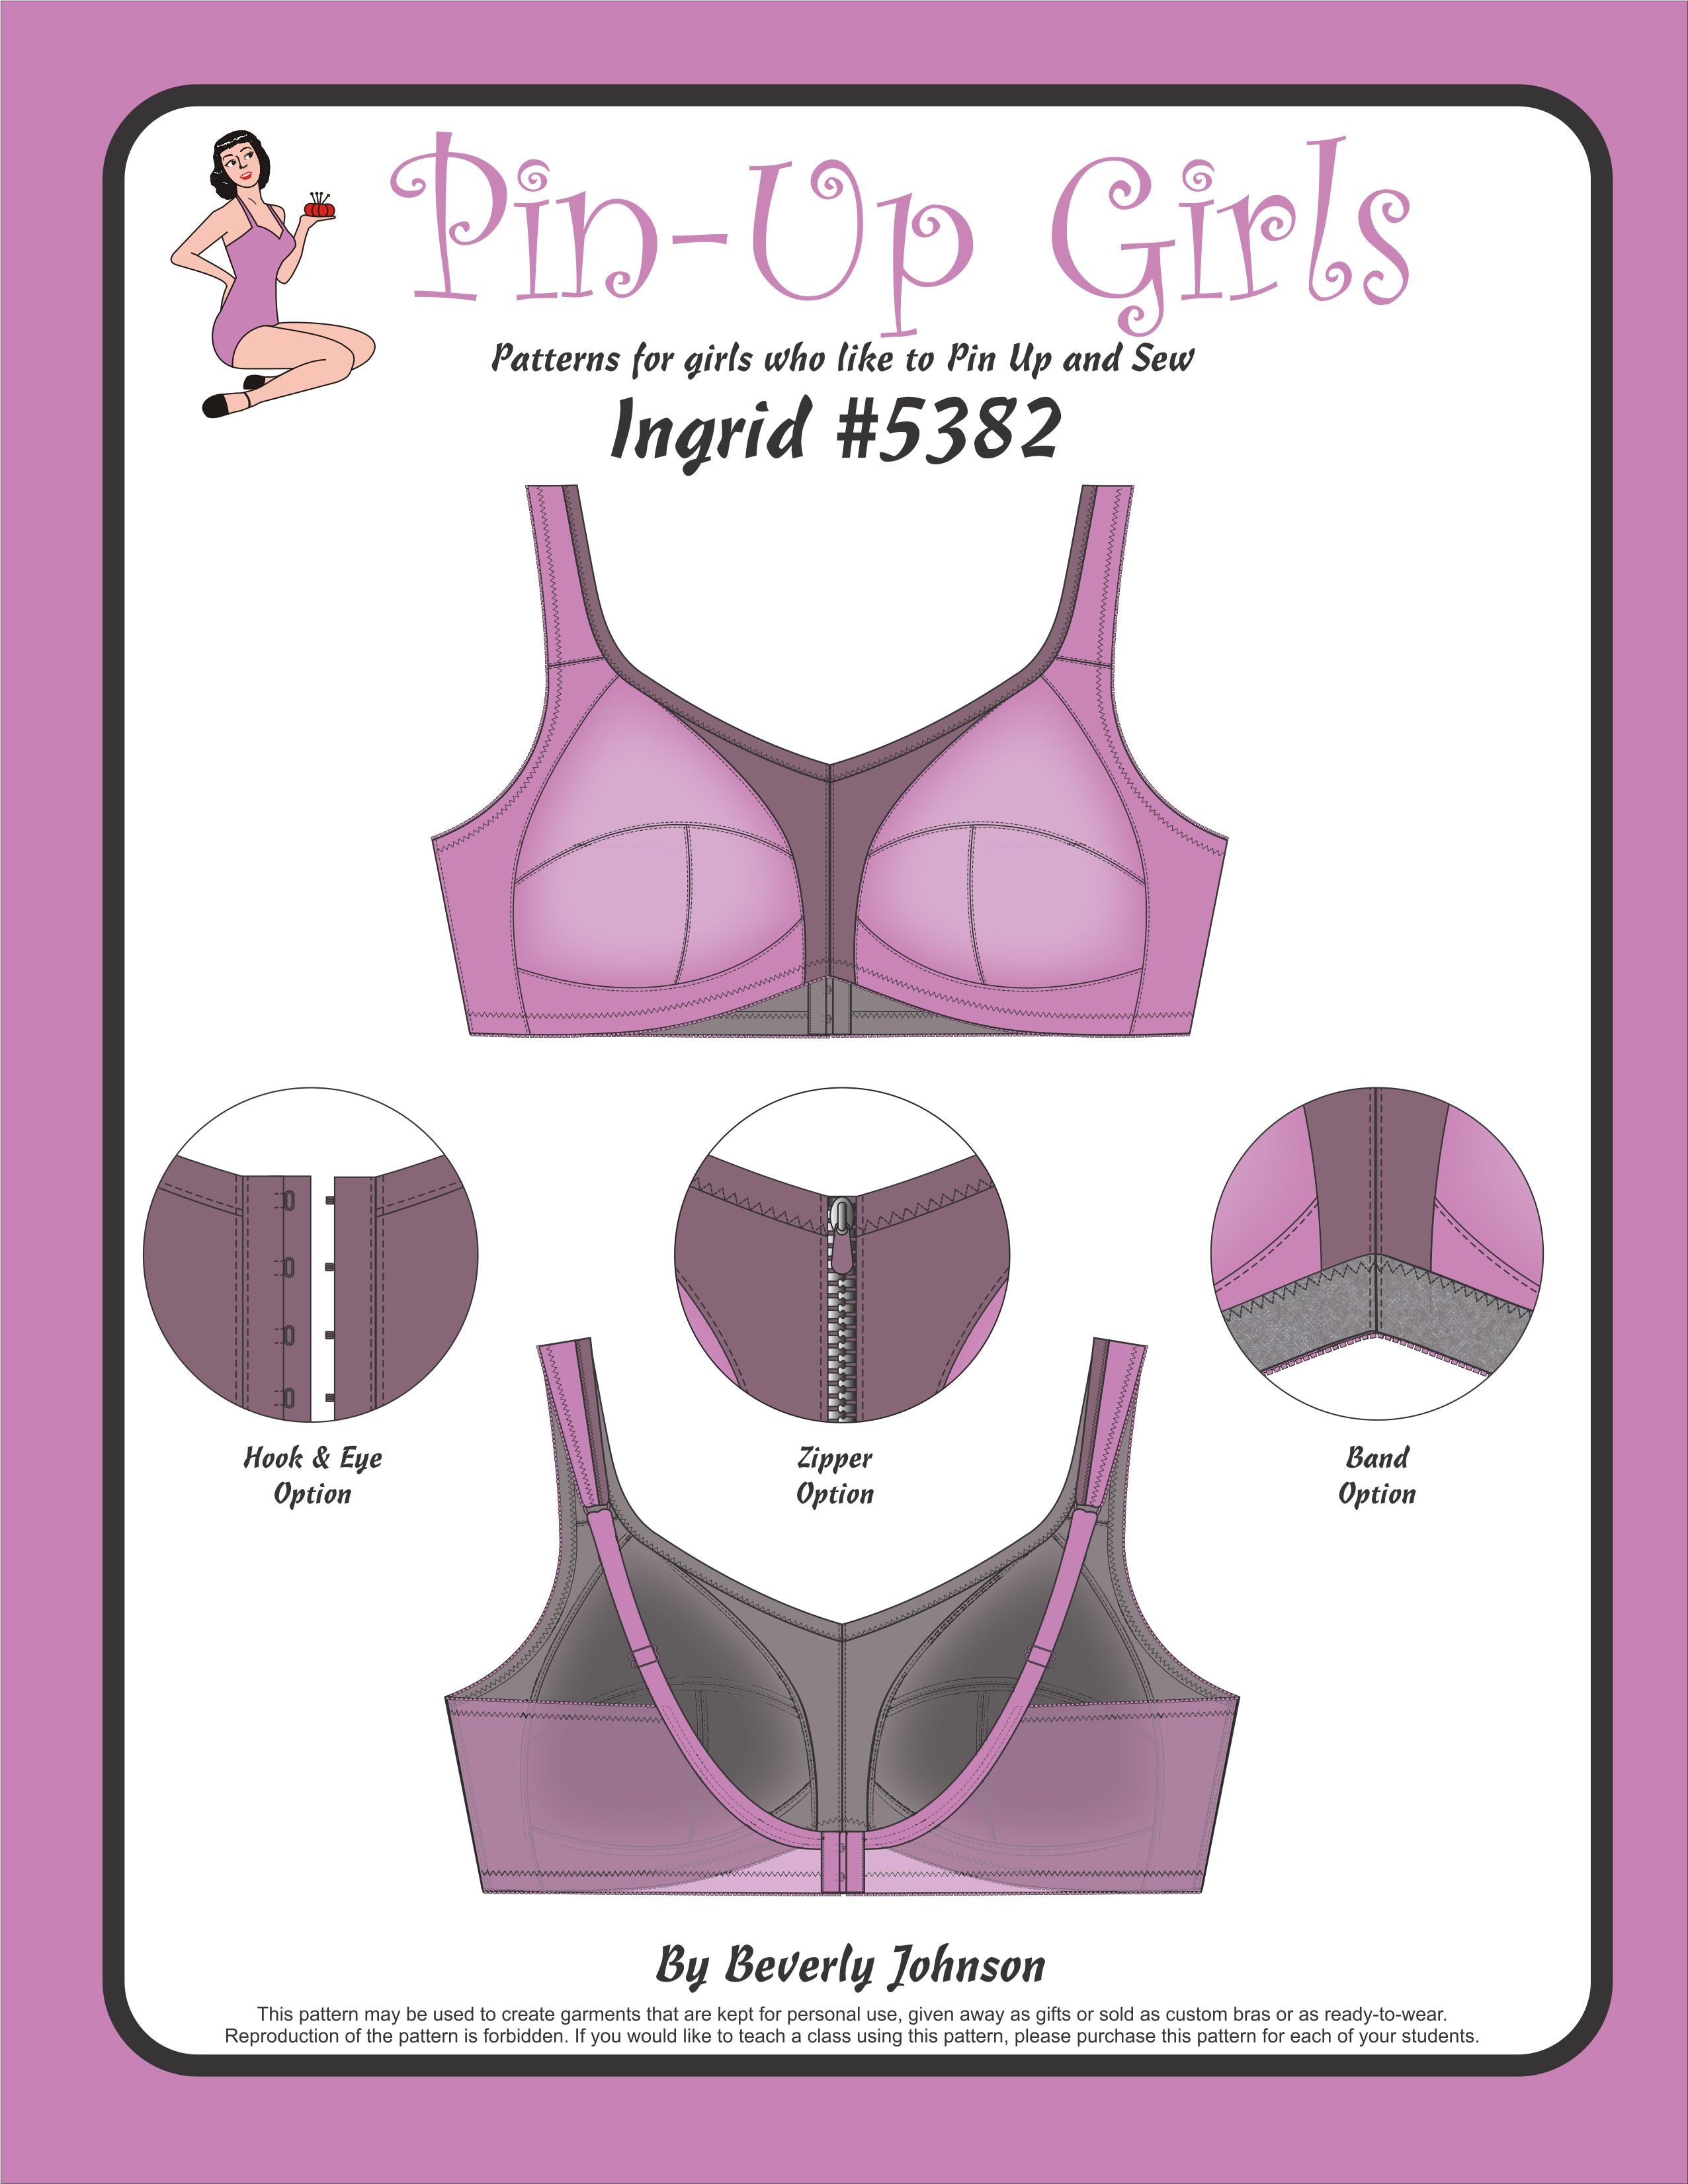 Greenstyle Endurance Bra in Bands 28 33 actual Ribcage Measurement and Cups  B H PDF Sewing Pattern 